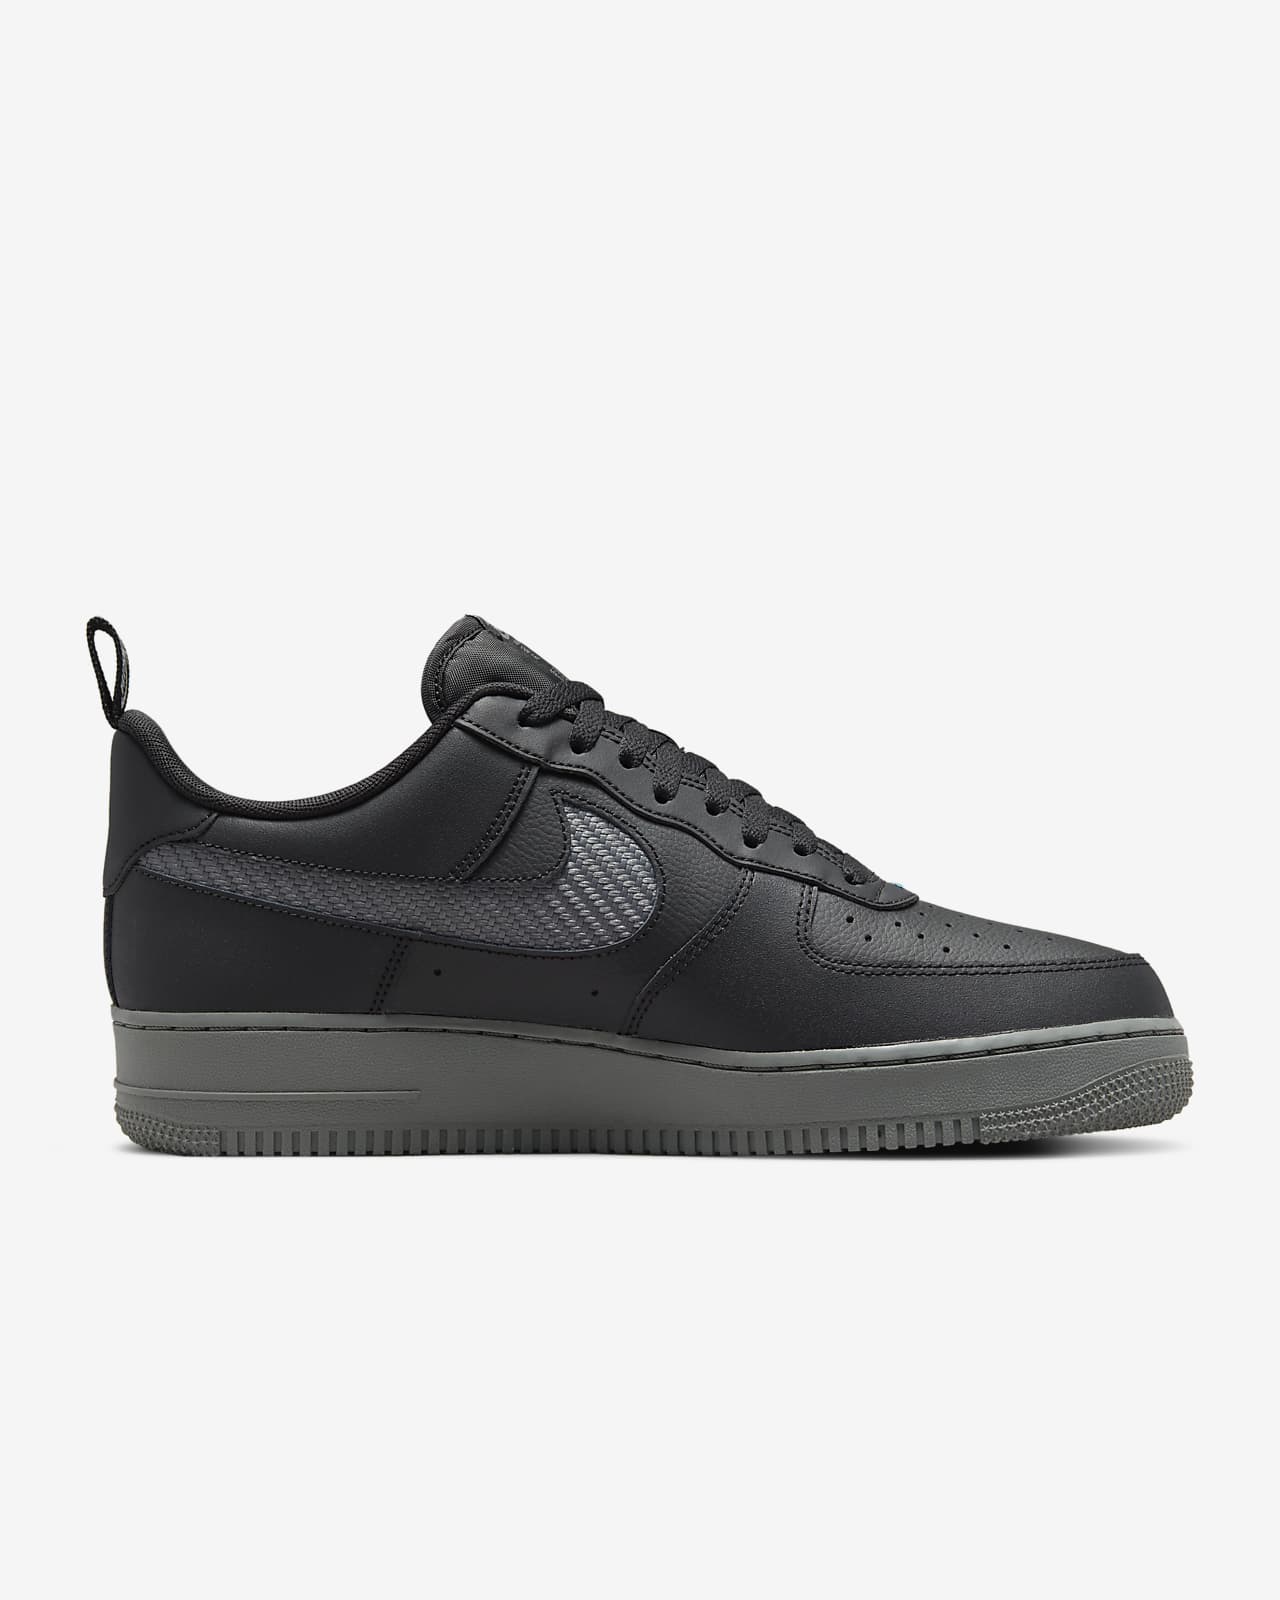 Nike Men's Air Force 1 '07 LV8 Shoes in Black, Size: 9.5 | Dr9866-001